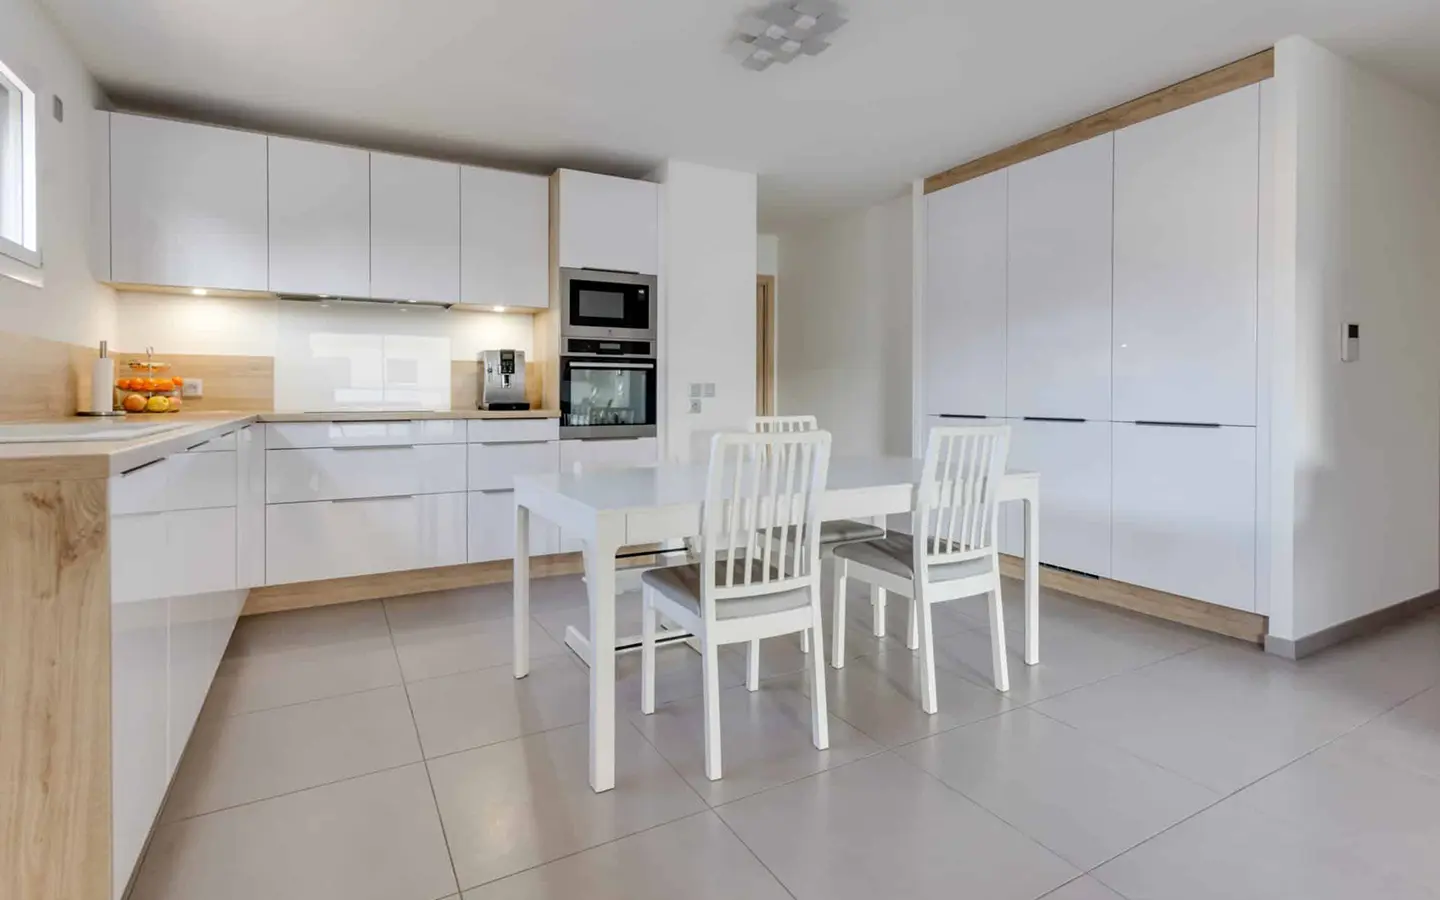 Achat immobilier appartement t4 terrasse Annecy cuisine